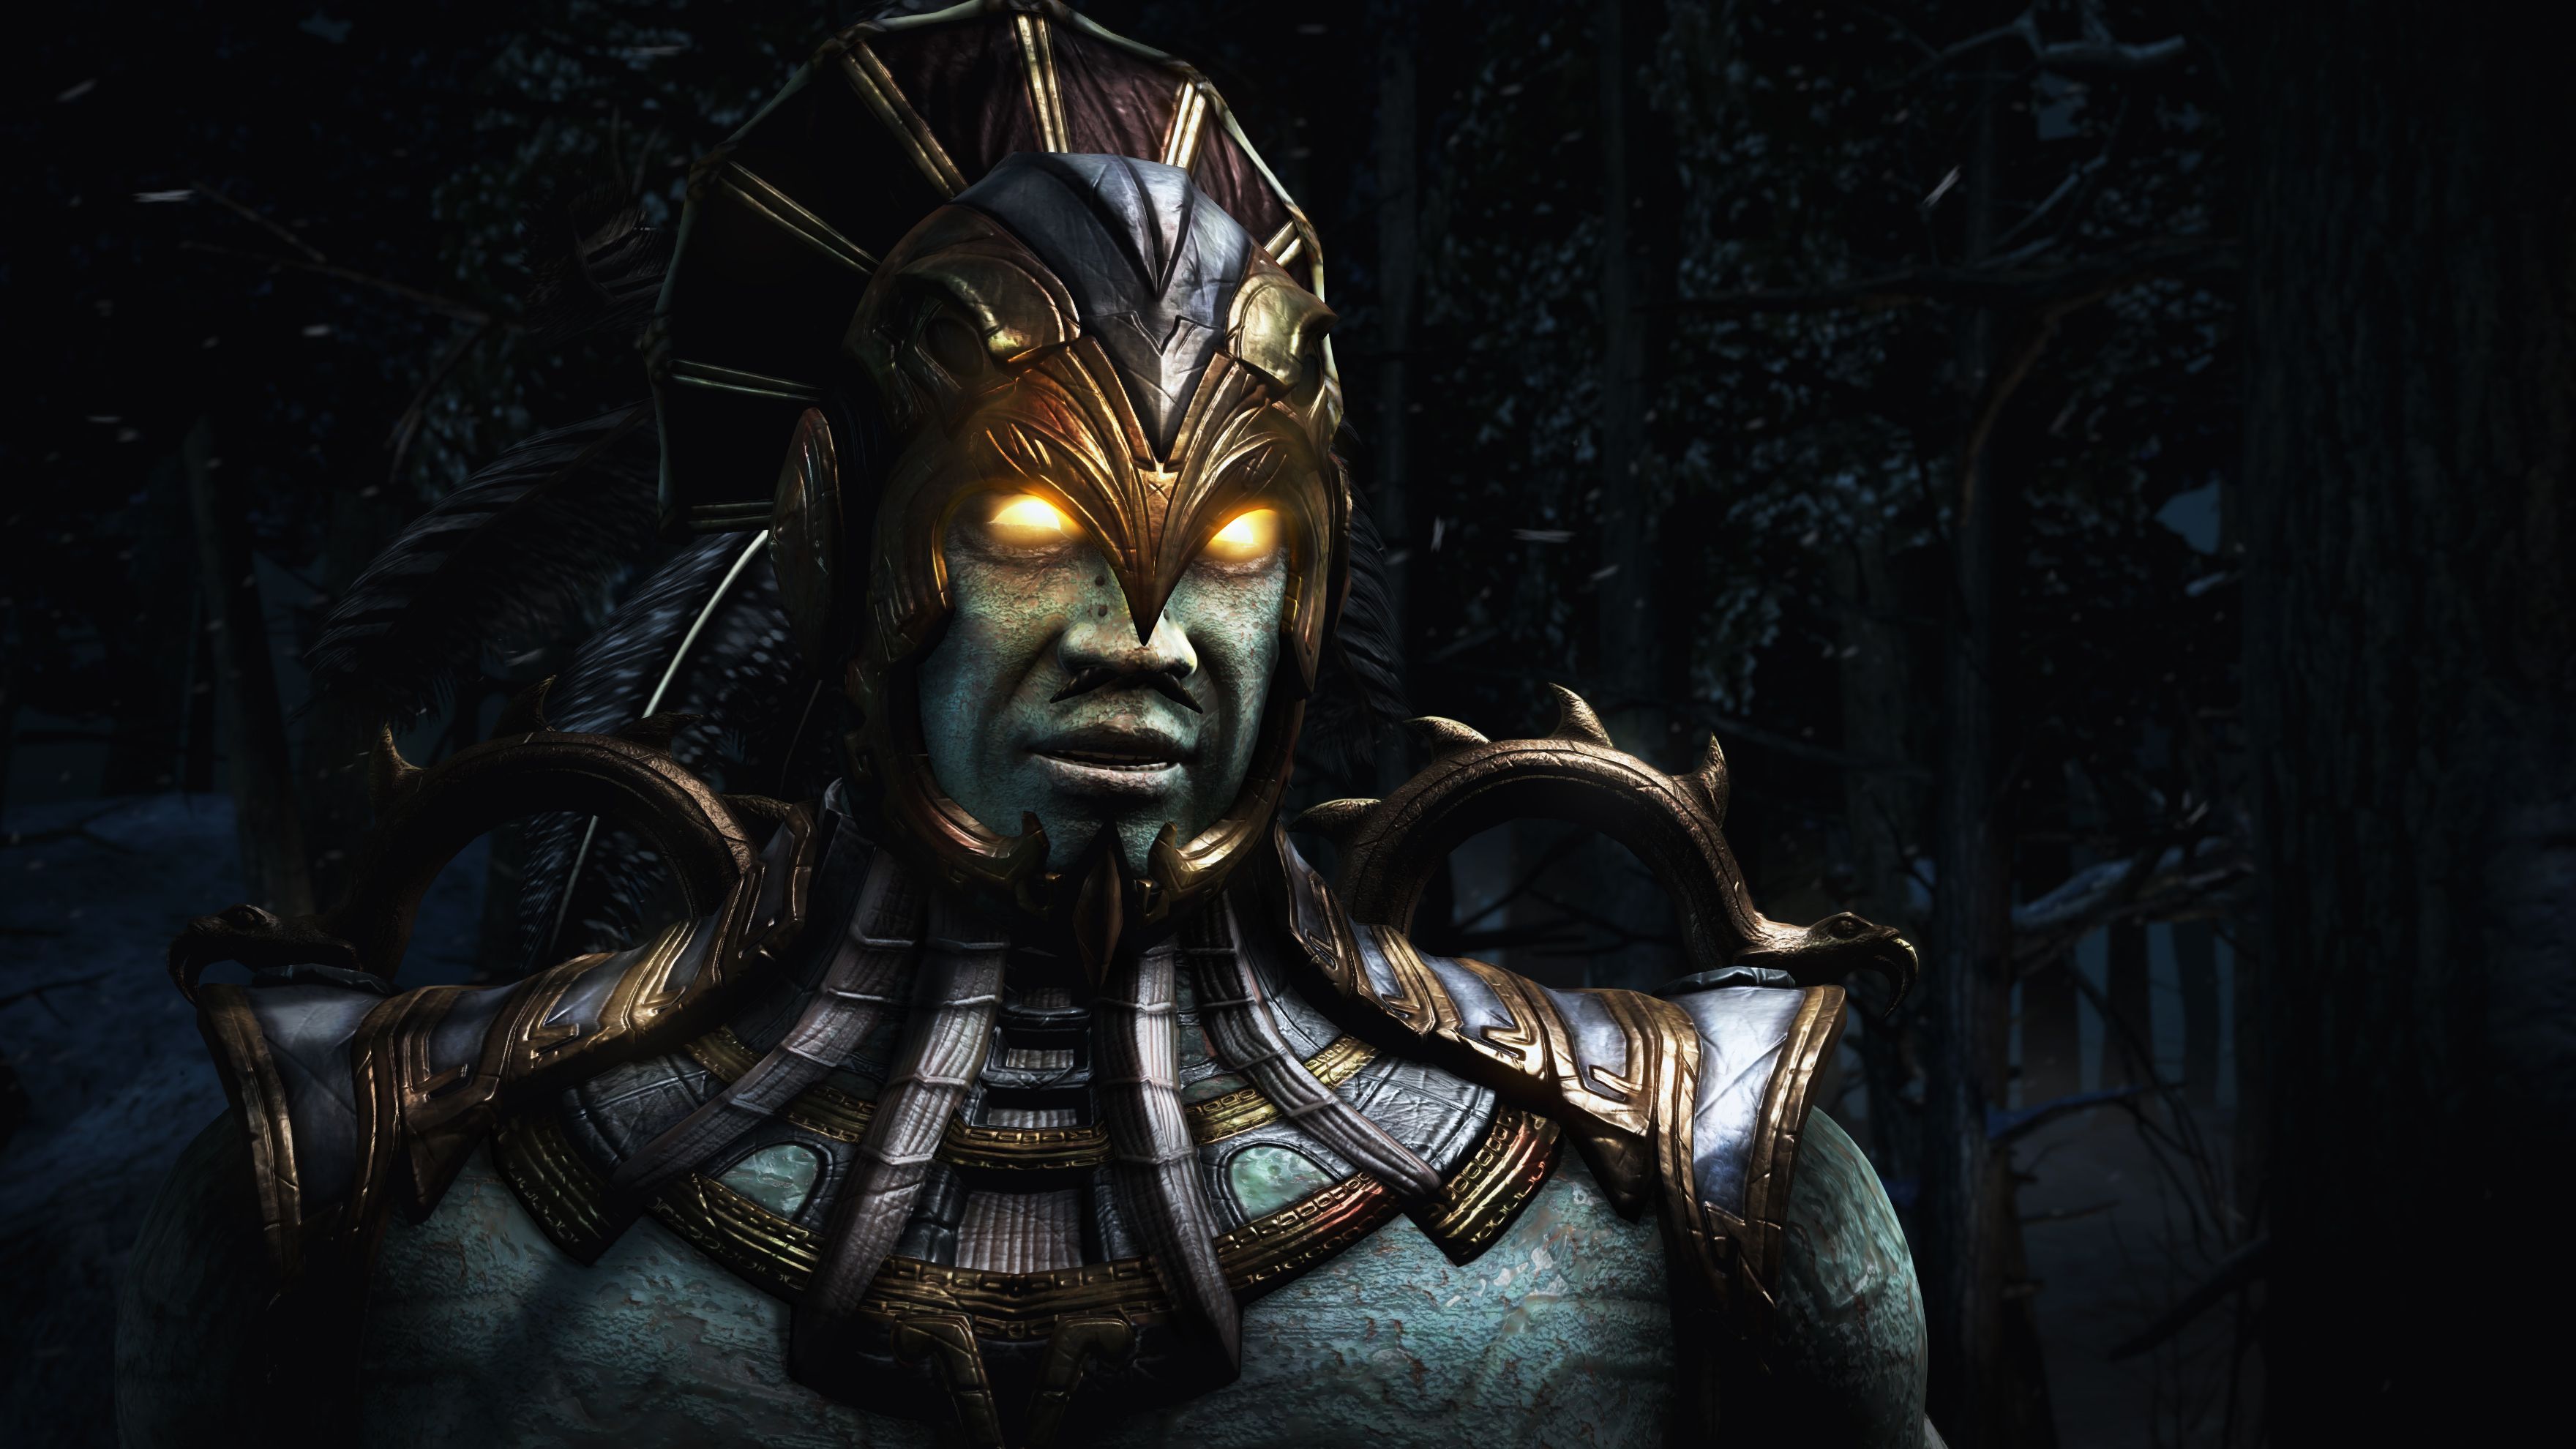 Kotal Kahn screenshots, image and picture